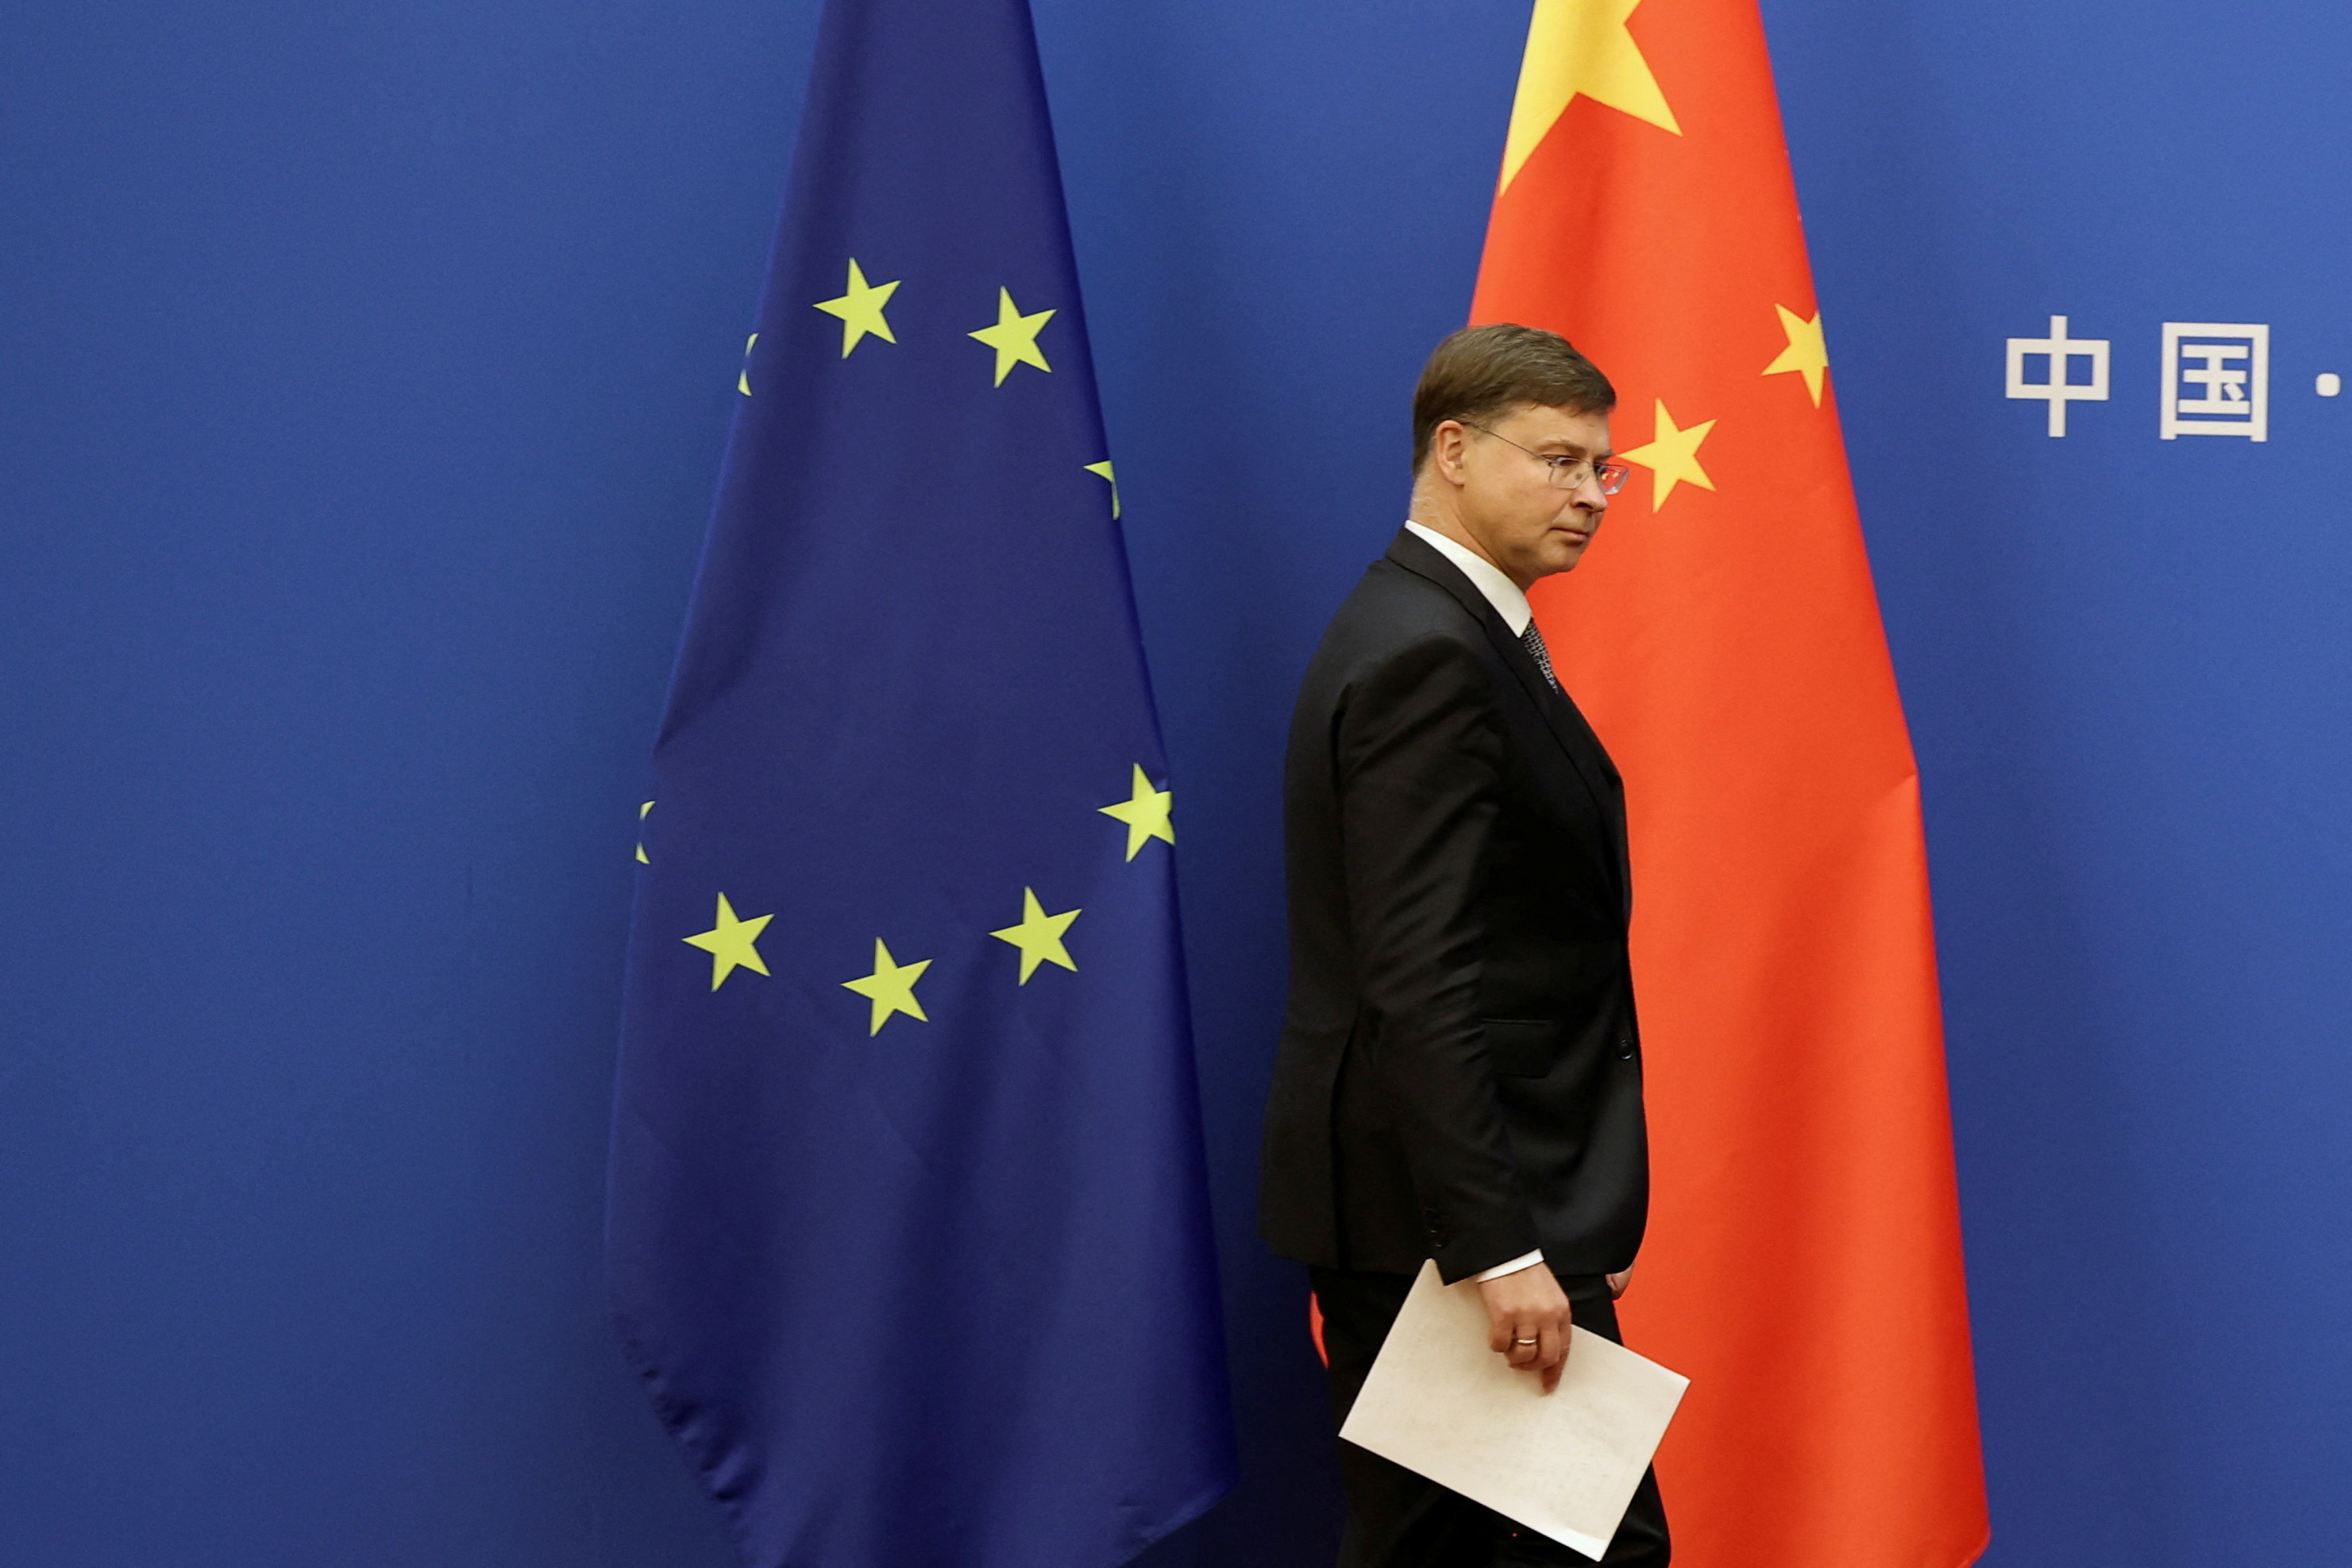 European Commission's Executive Vice President Valdis Dombrovskis in Beijing